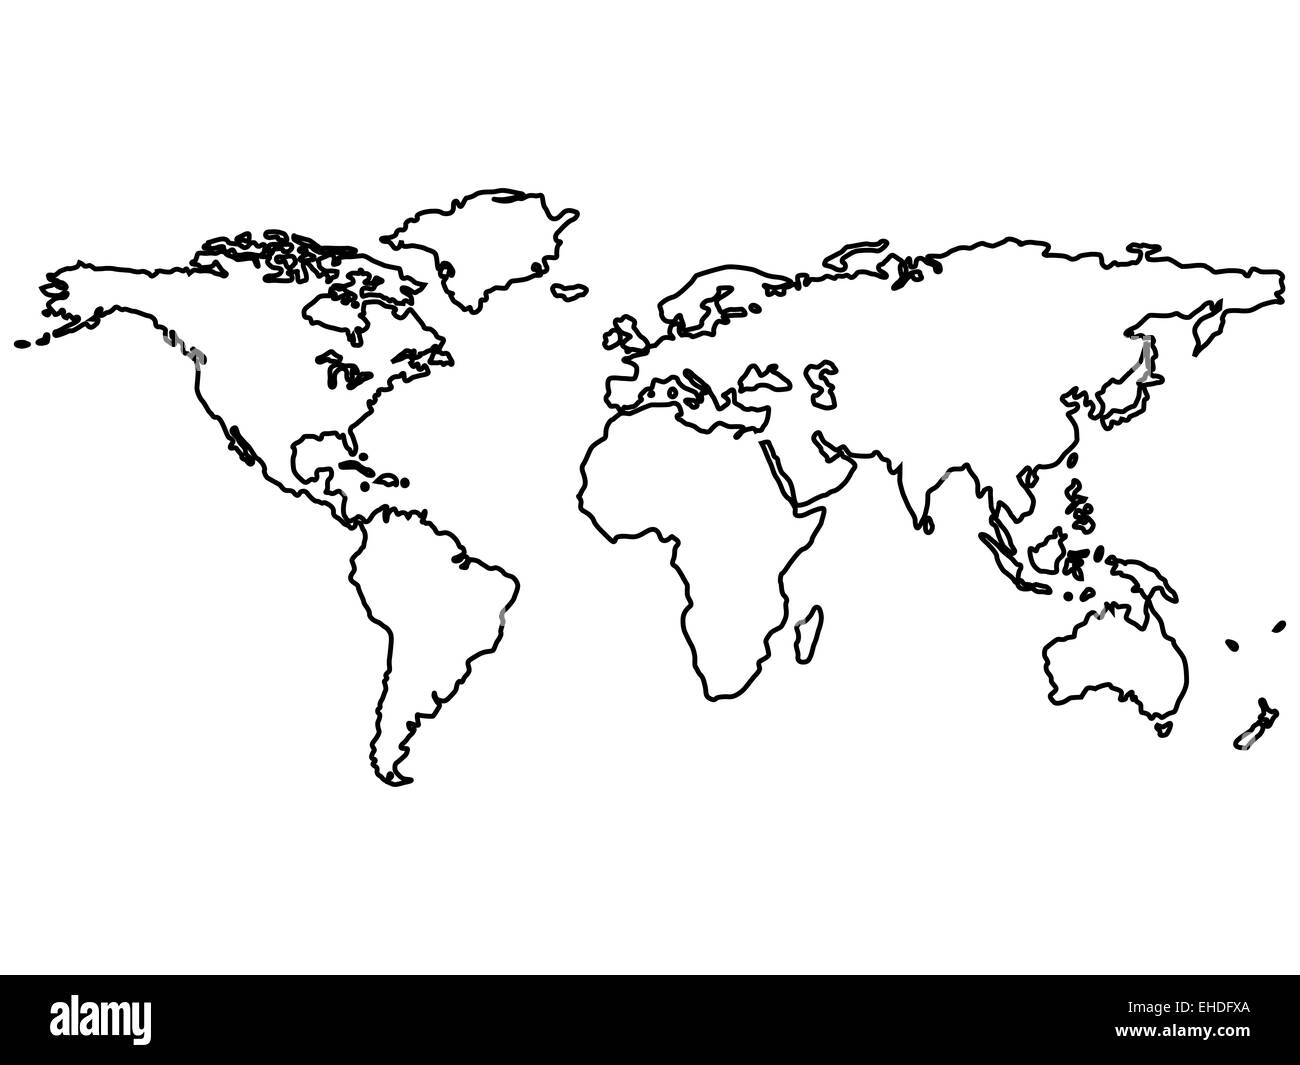 Black World Map Outlines Isolated On White Stock Photo Alamy